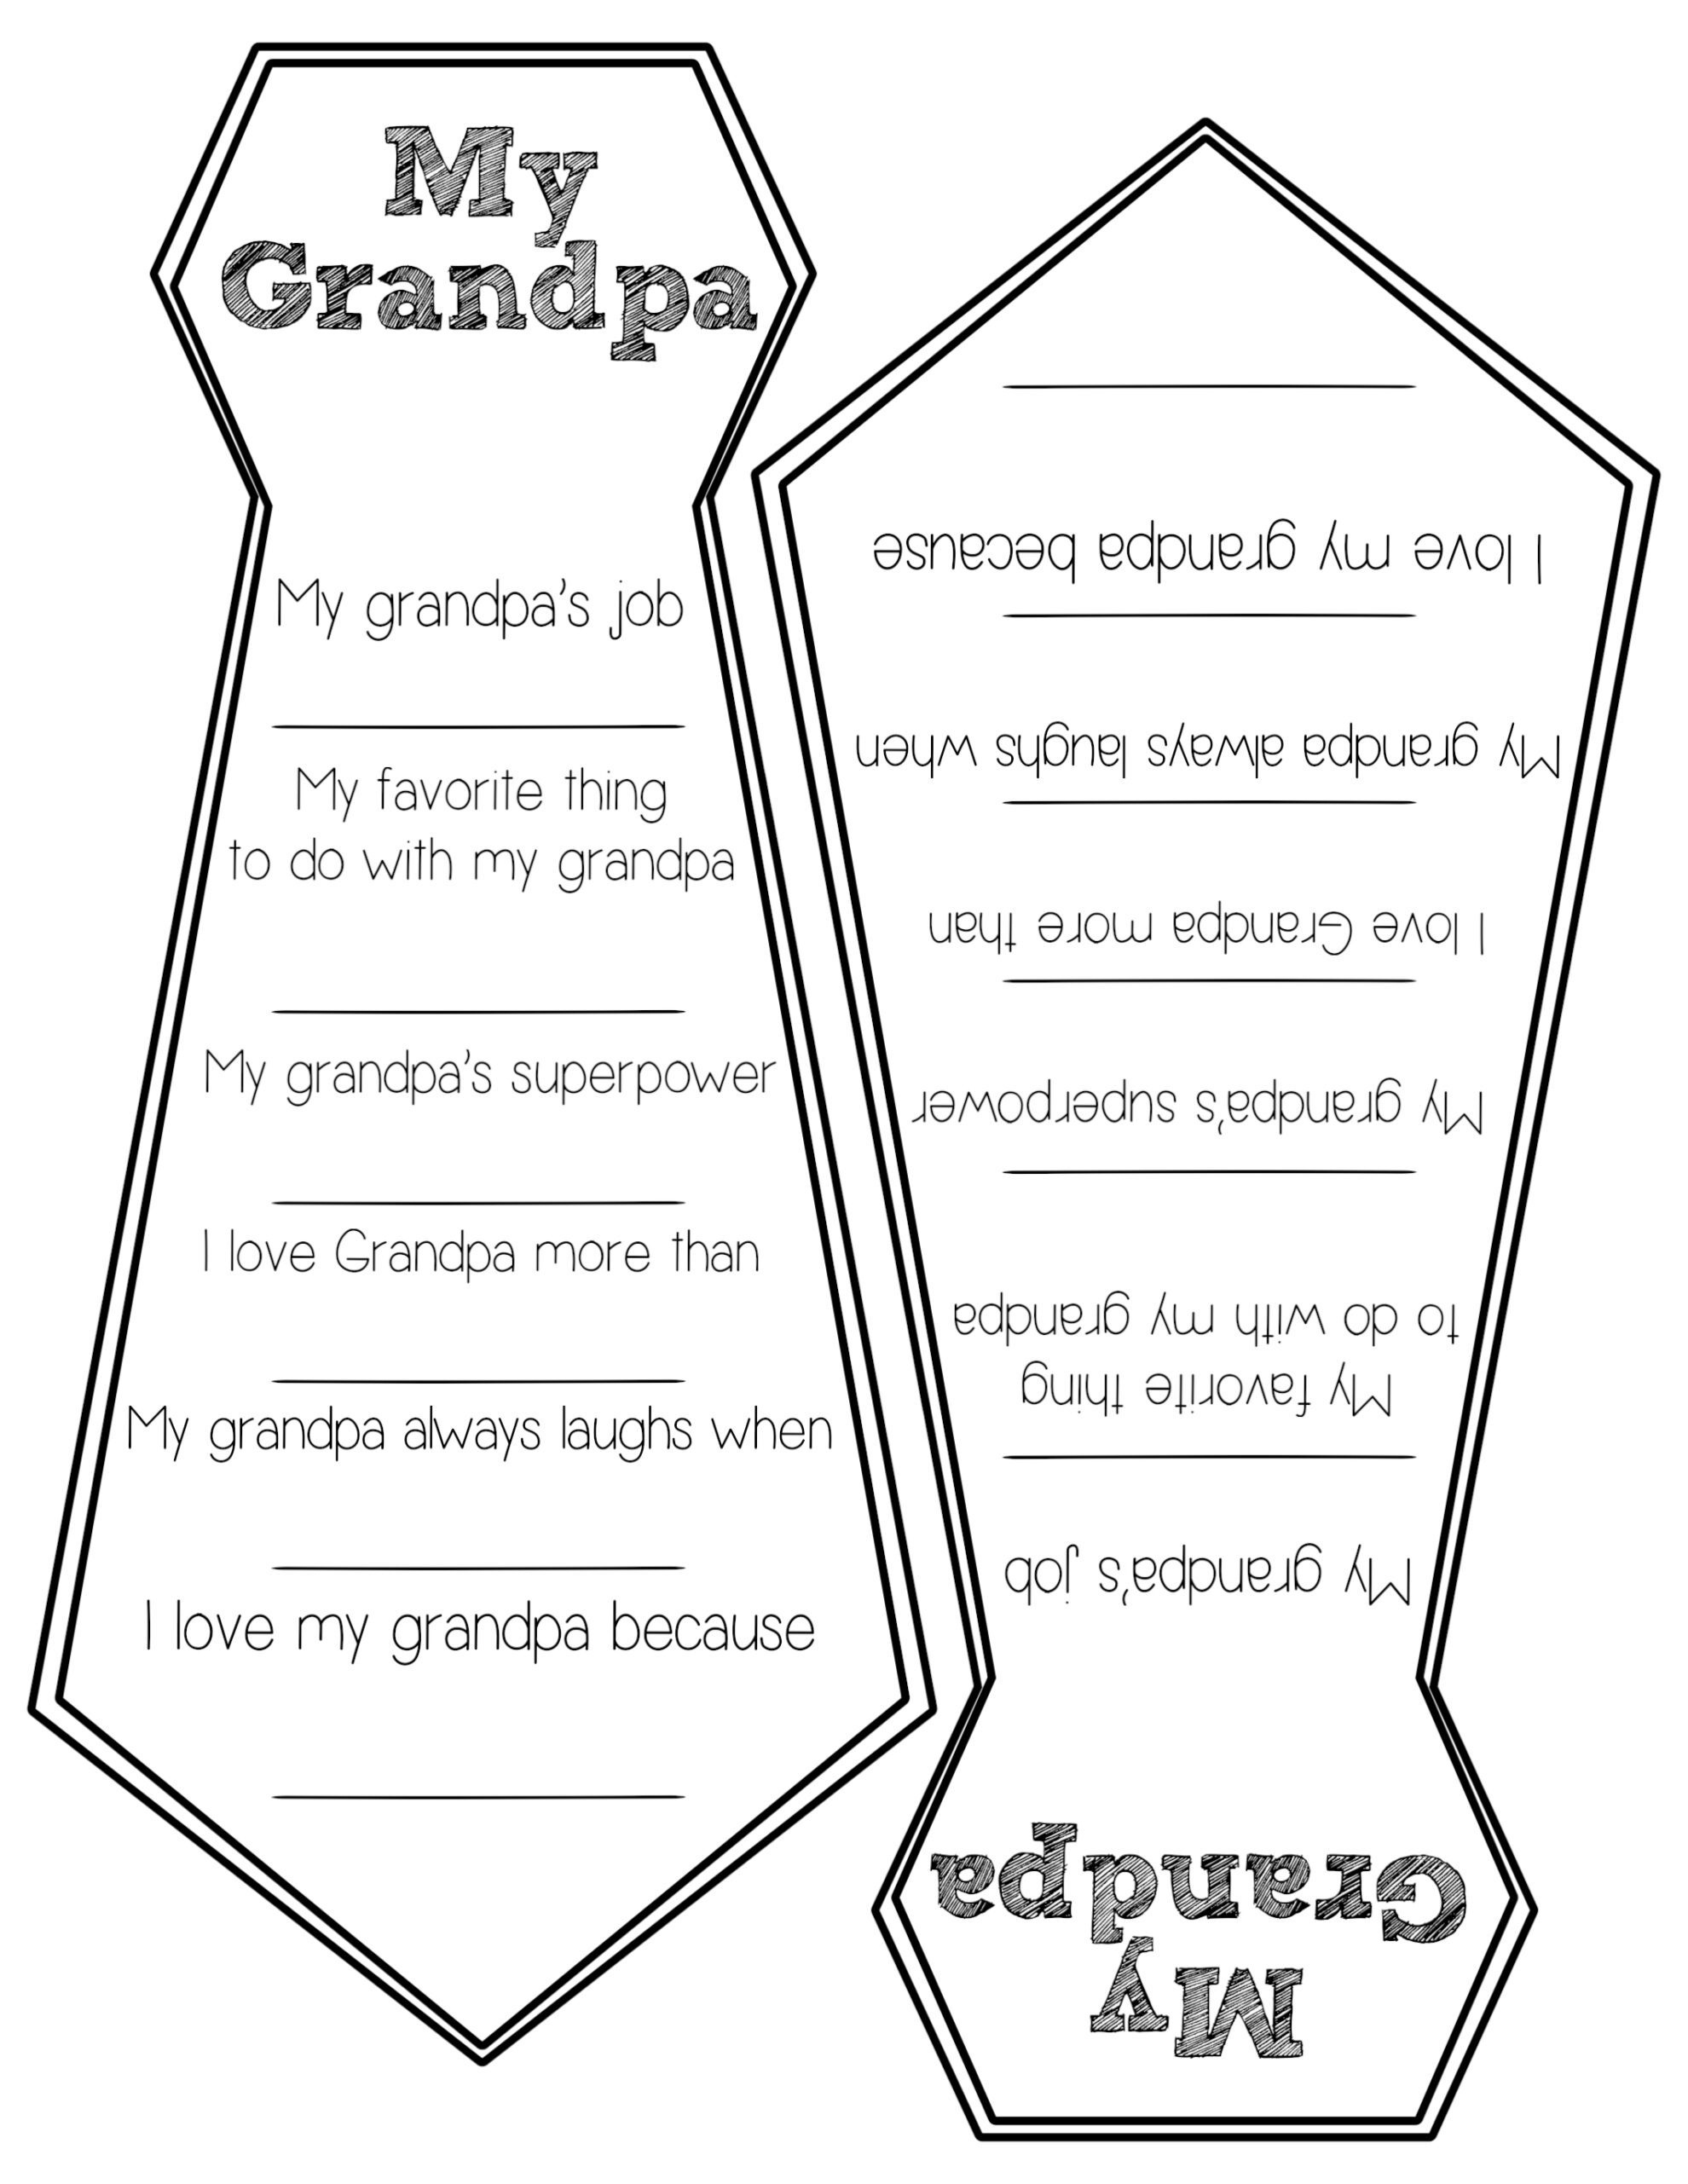 Father&amp;#039;s Day Free Printable Cards - Paper Trail Design - Free Printable Father&amp;#039;s Day Card From Wife To Husband